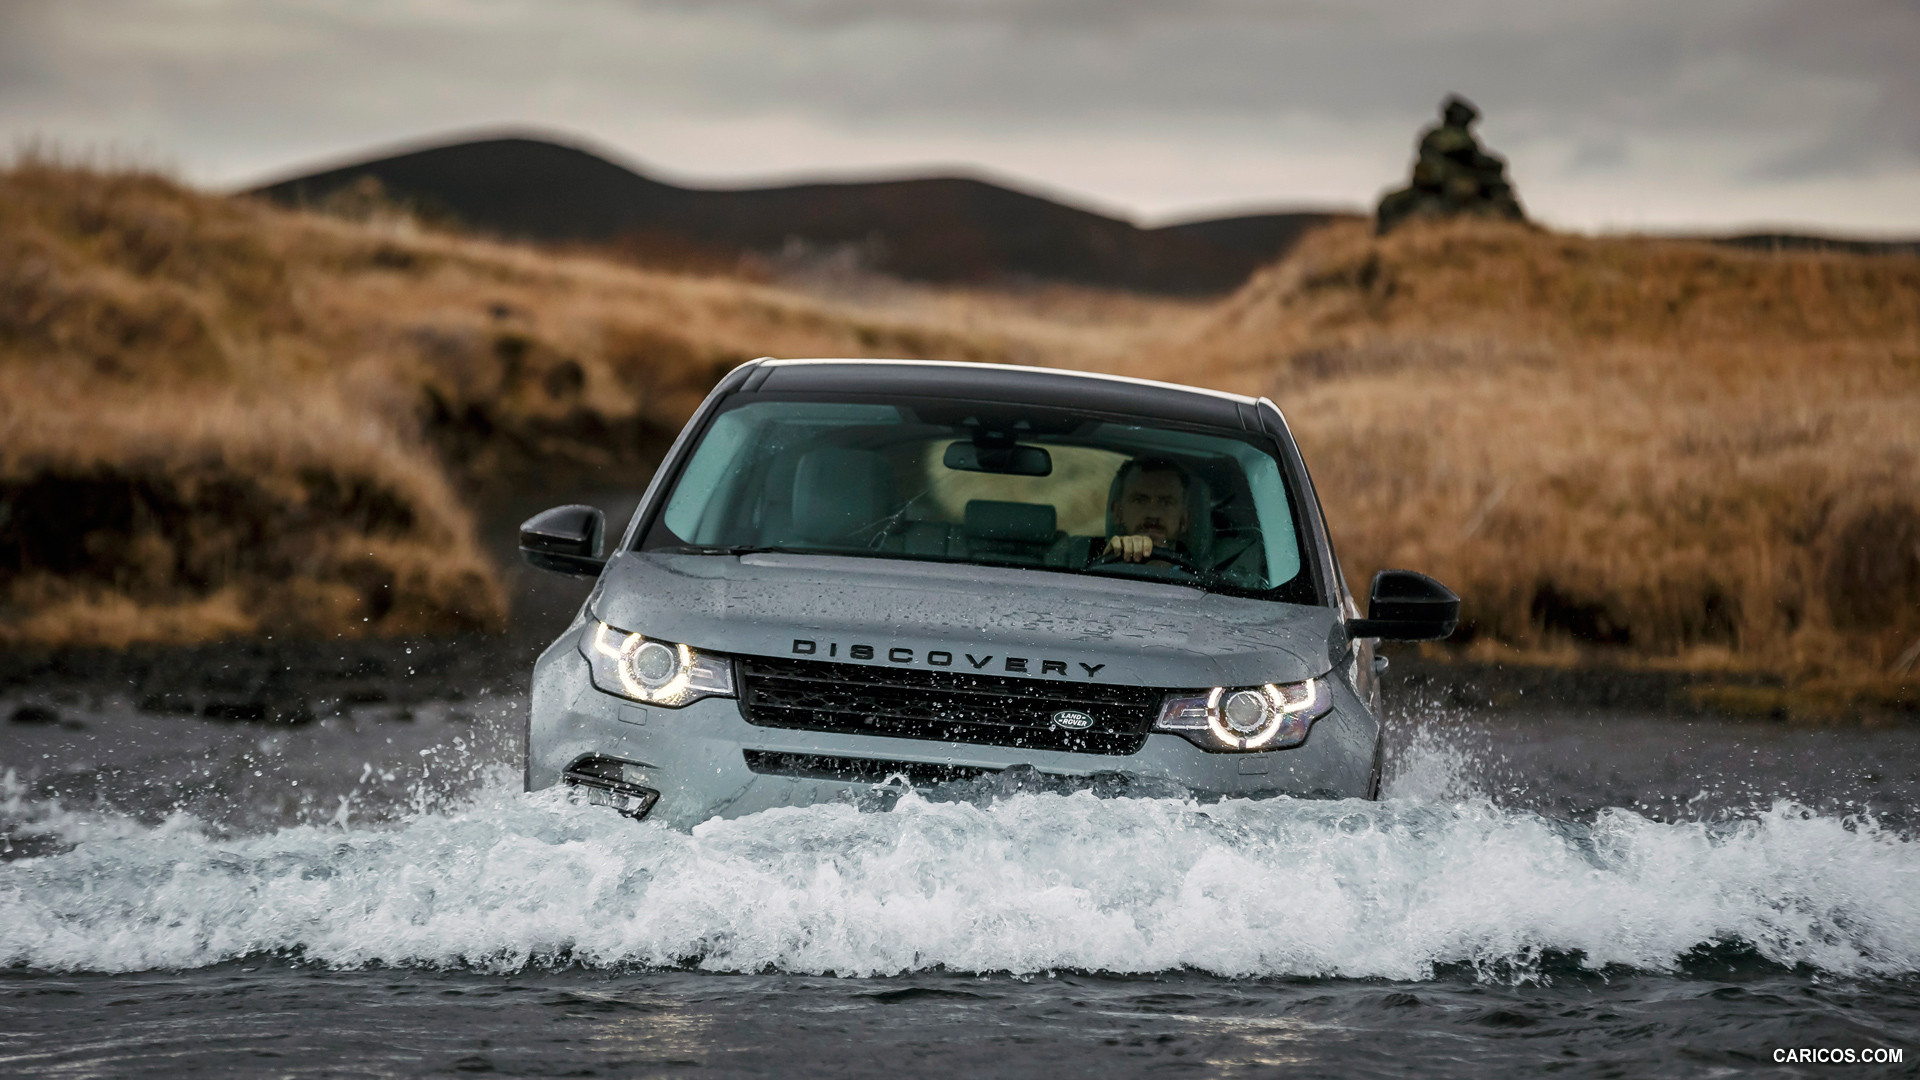 36+] Land Rover Discovery Sport Wallpapers - WallpaperSafari